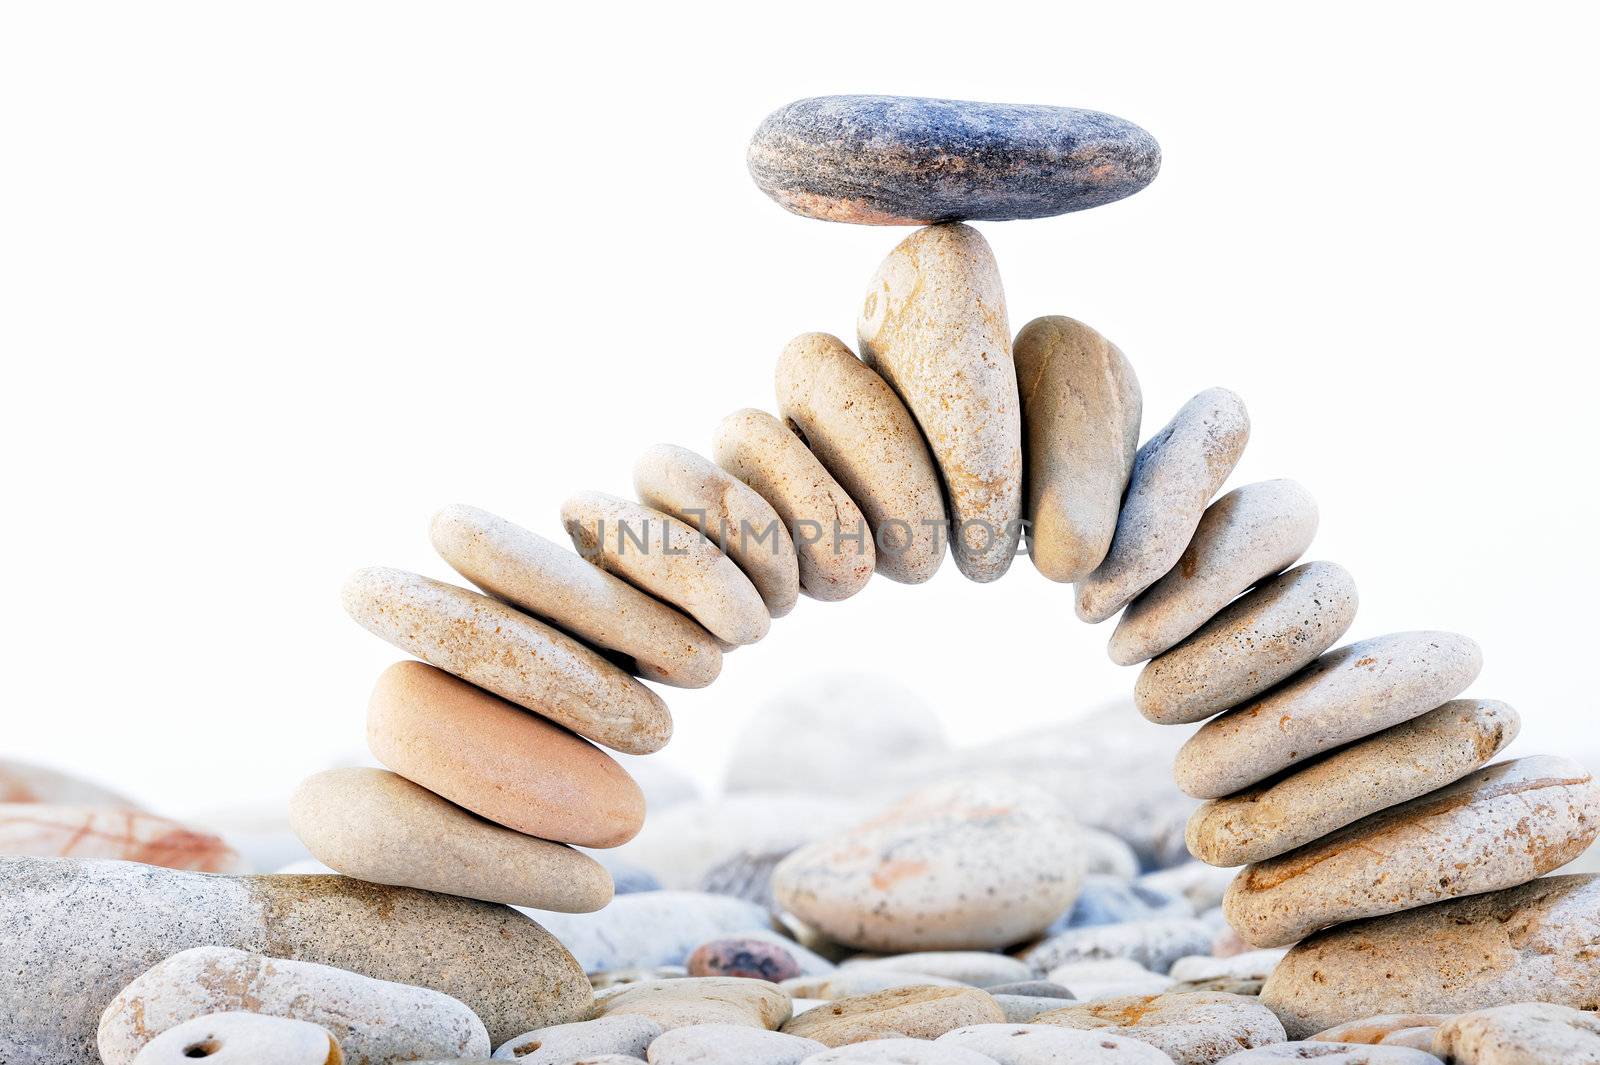 Arch of the pebbles with a black stone on top